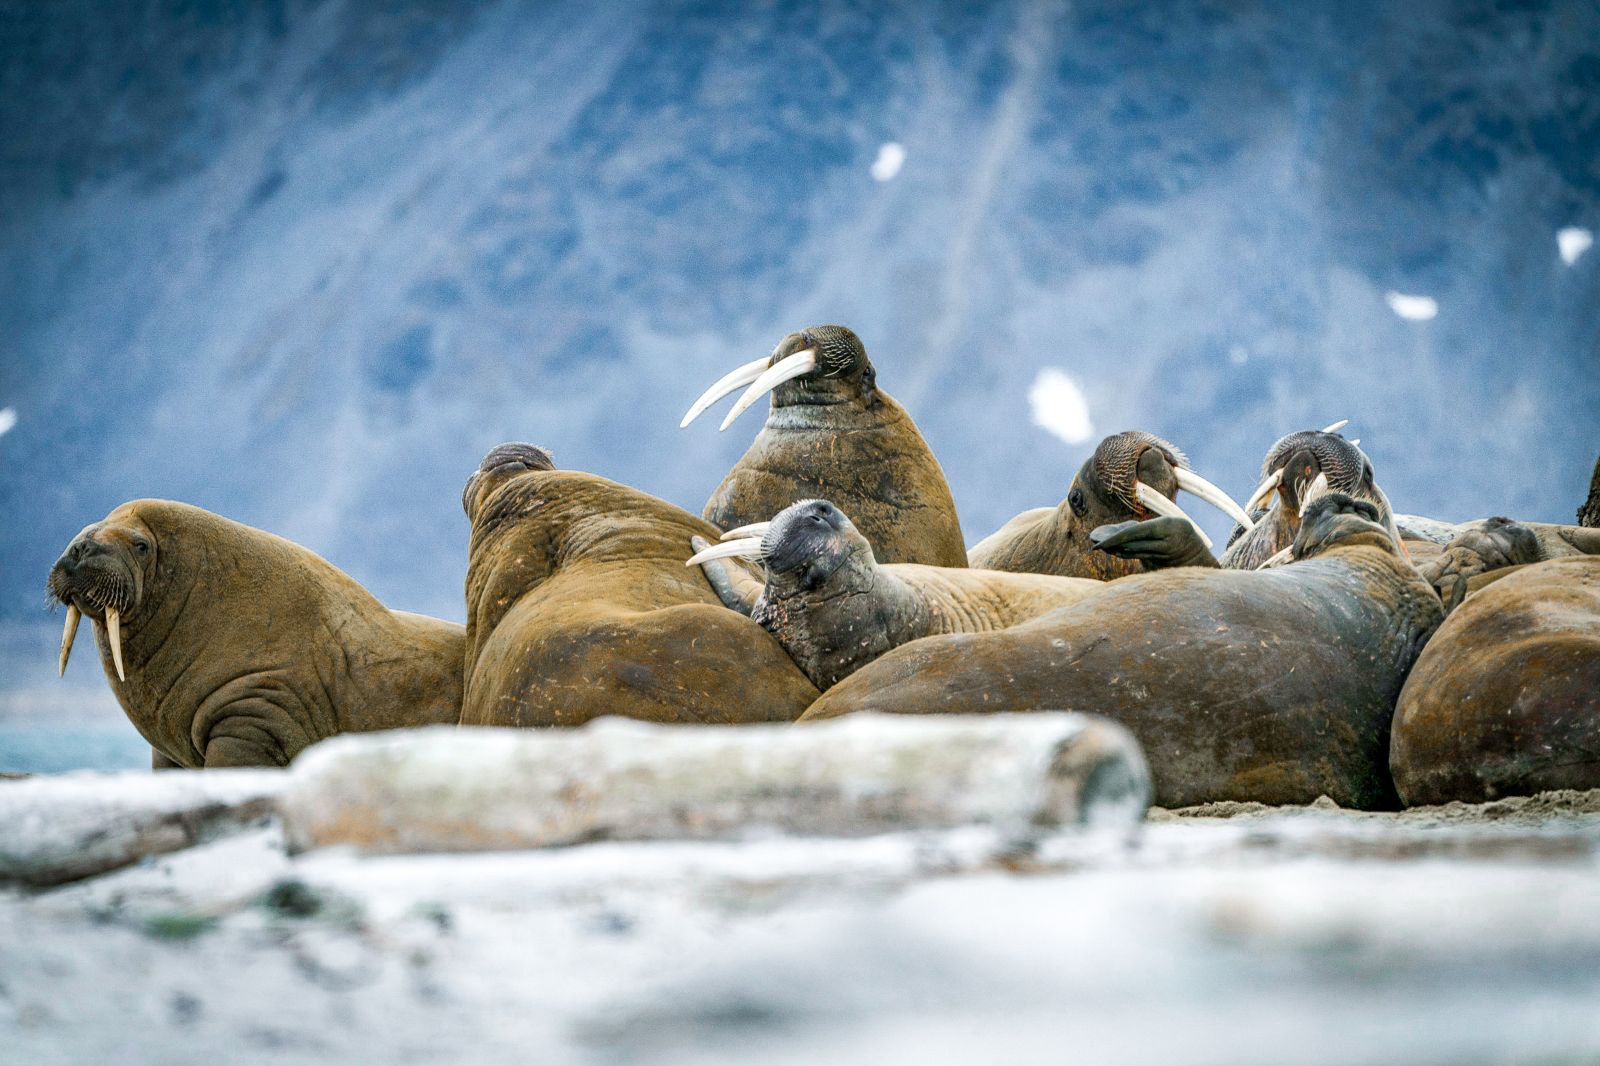 A group of walruses in the Arctic